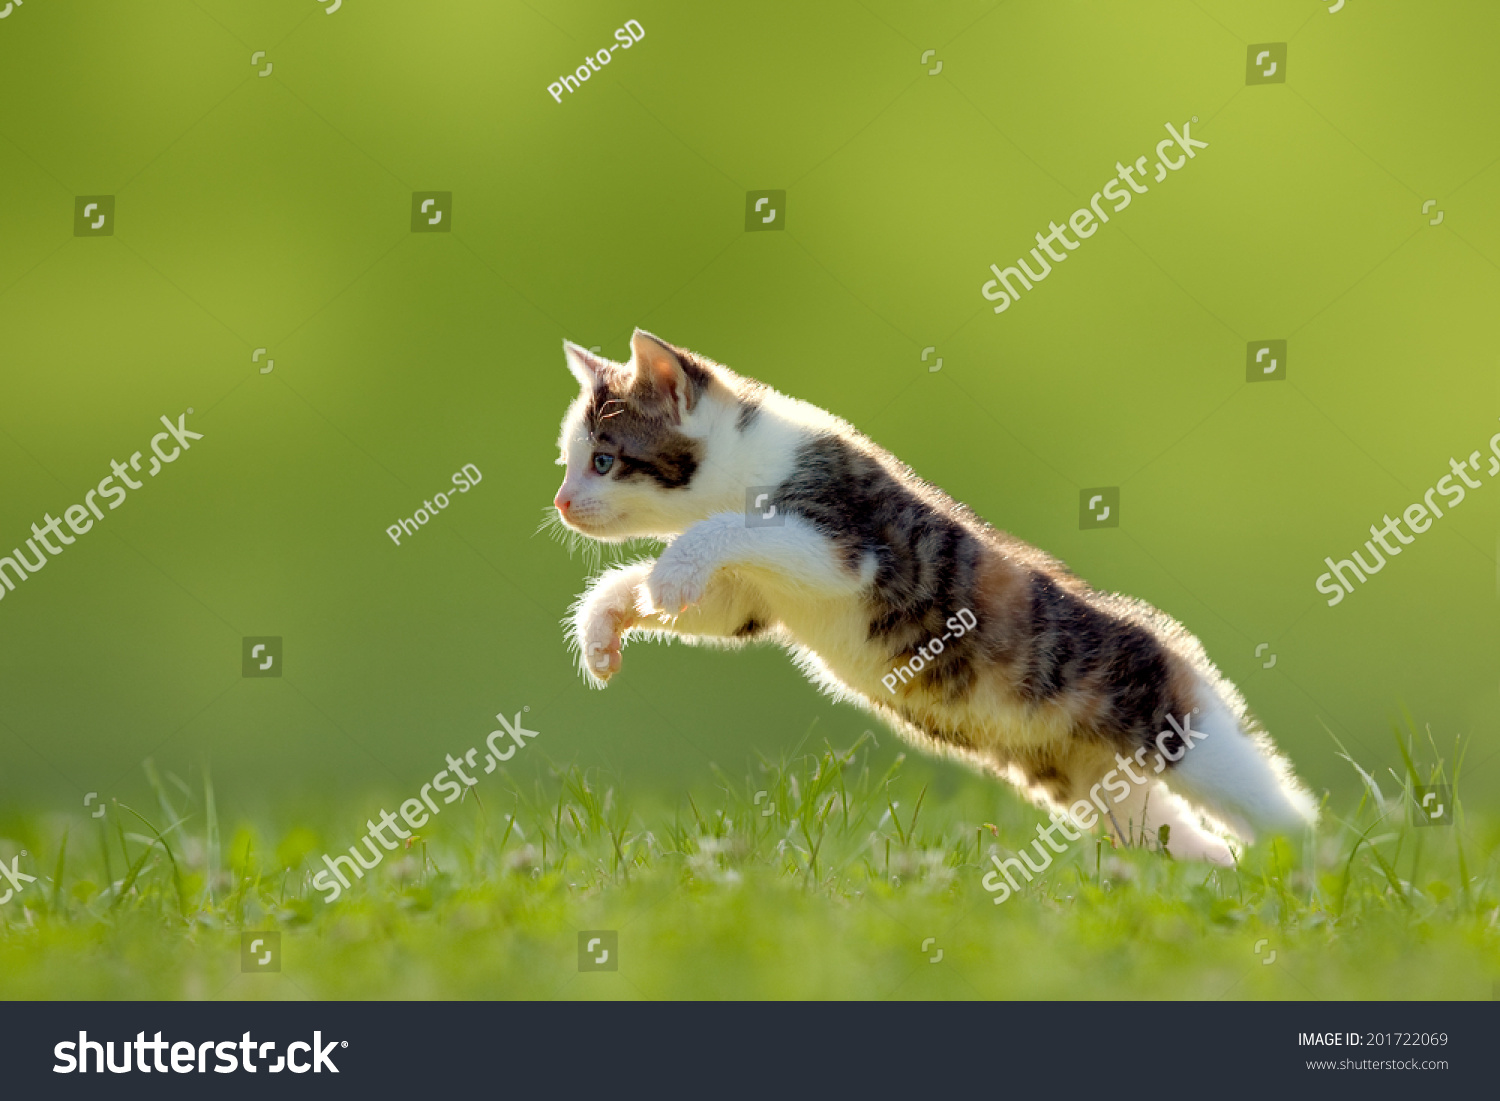 Young cat jumps over a meadow in the backlit #201722069